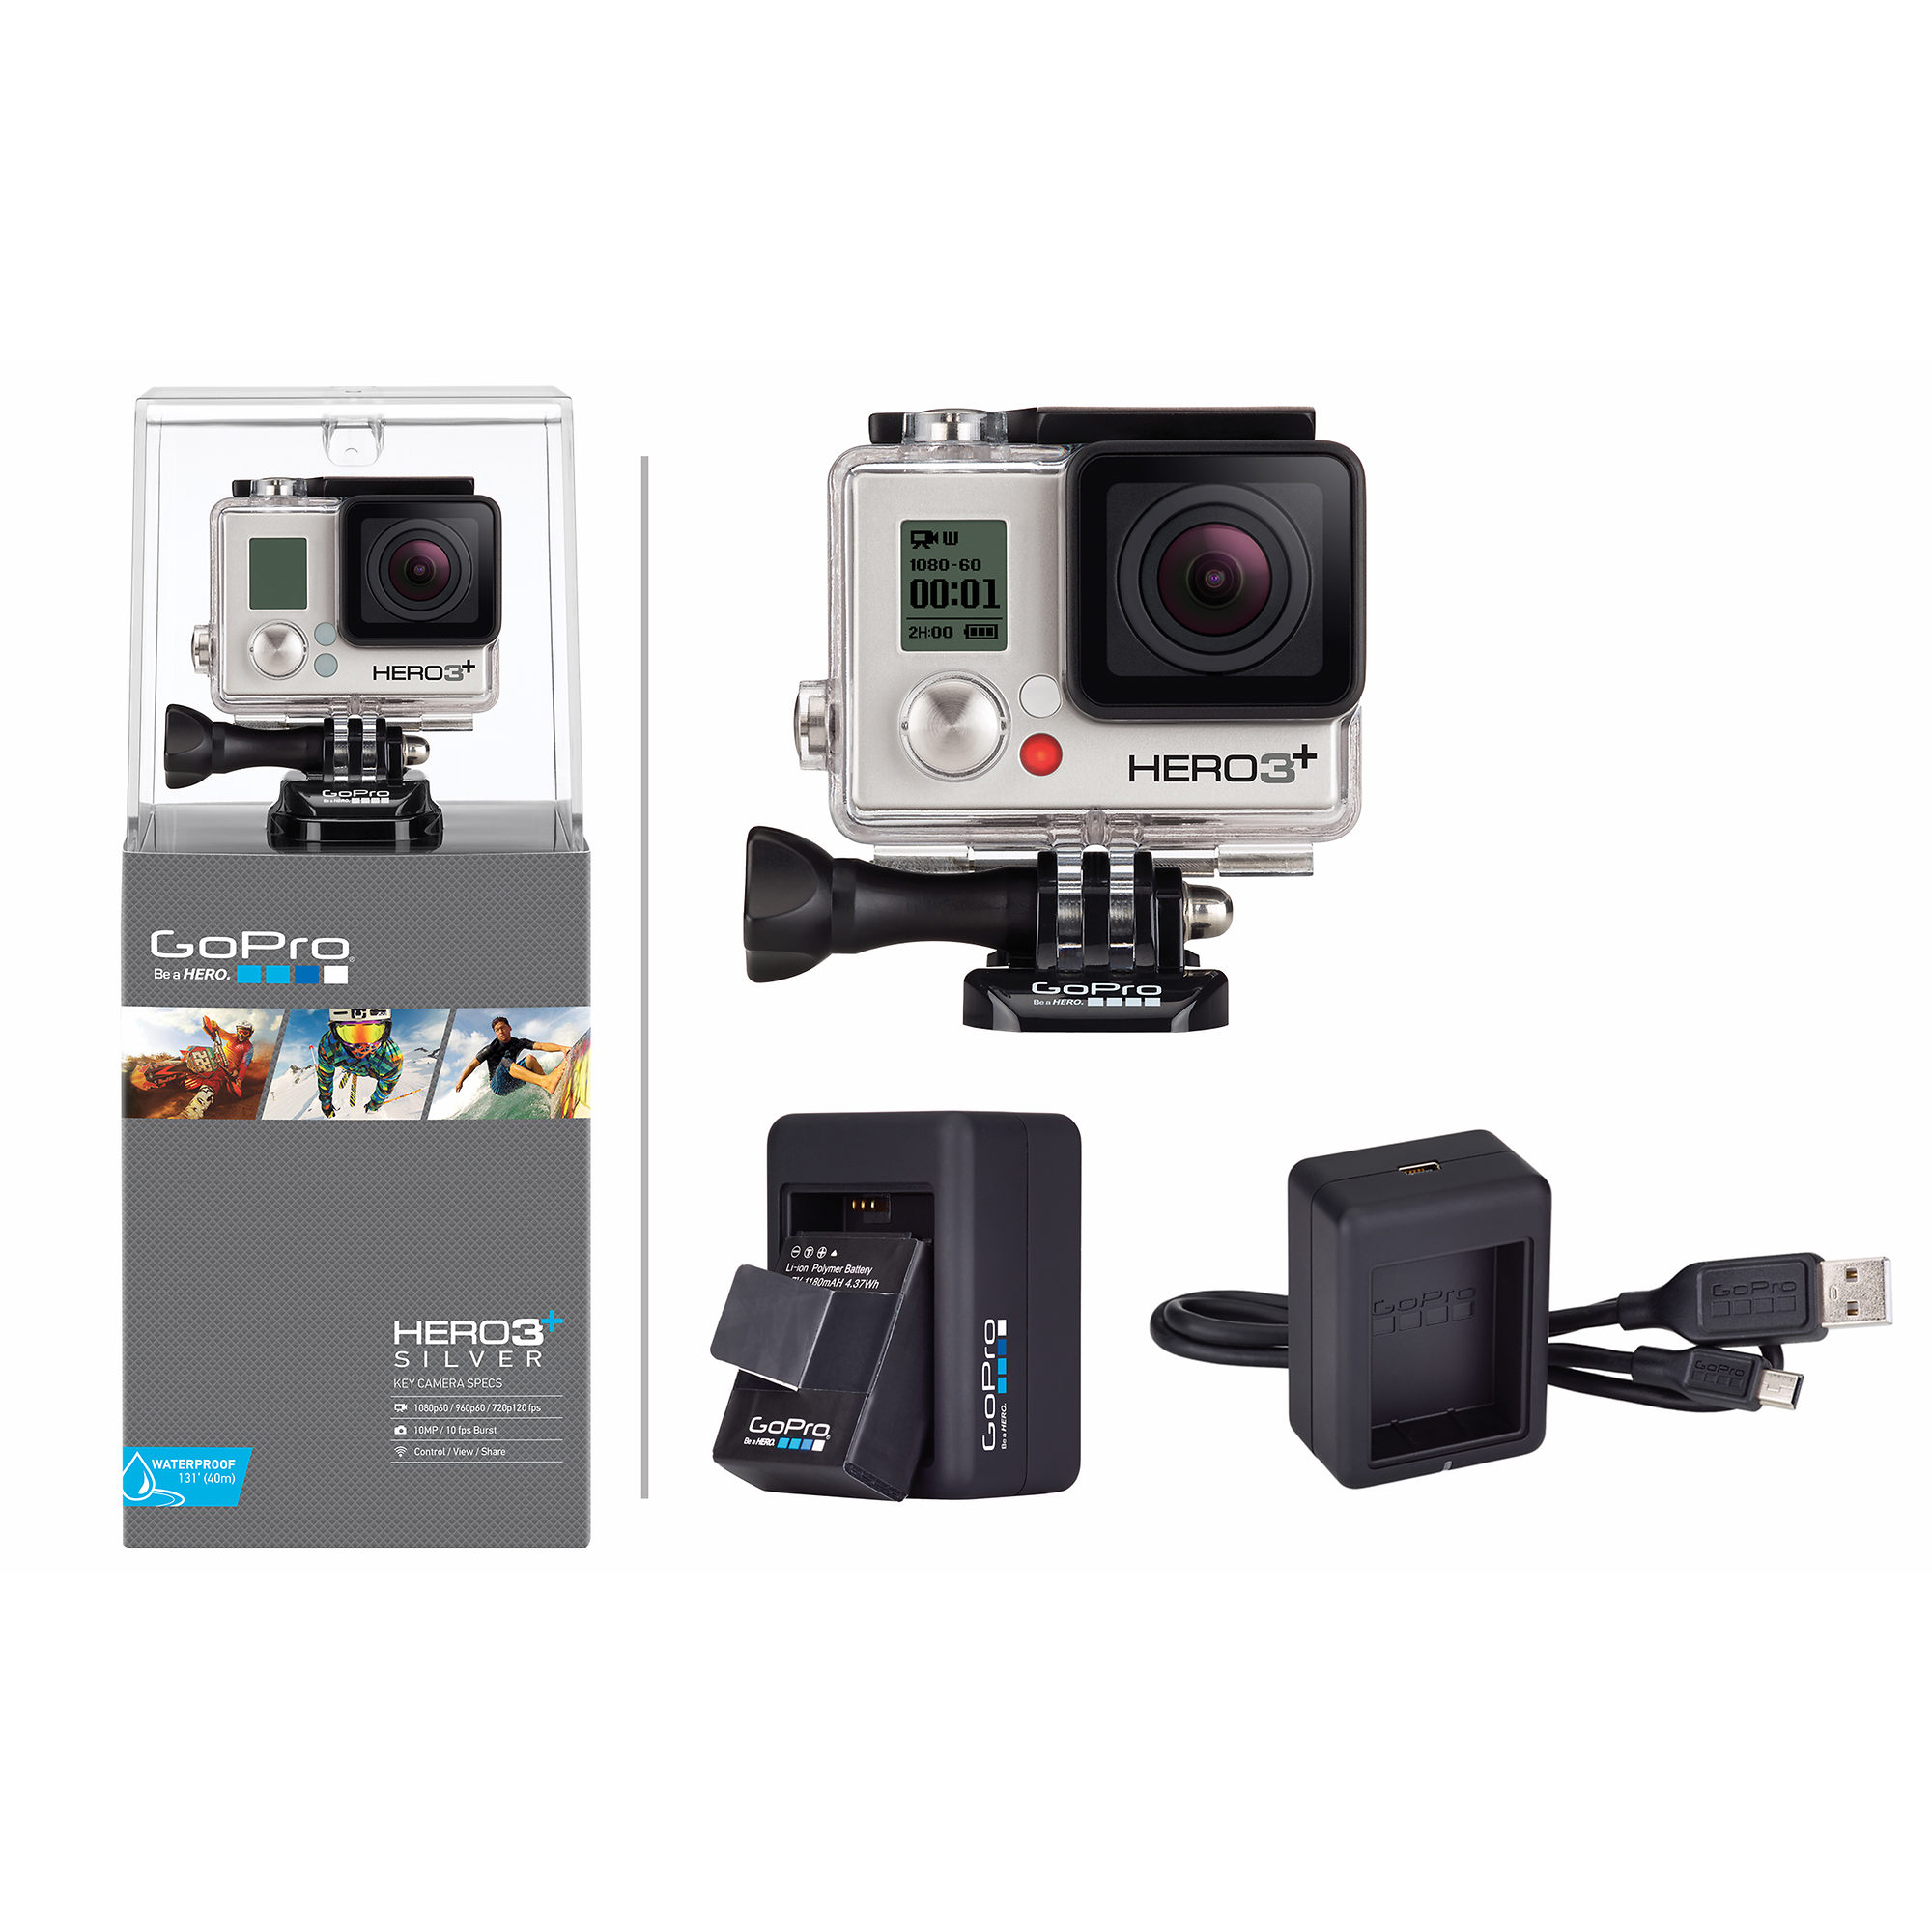 GoPro Hero3+ Silver Edition Action Camera with Additional Battery and Charger  $242.95